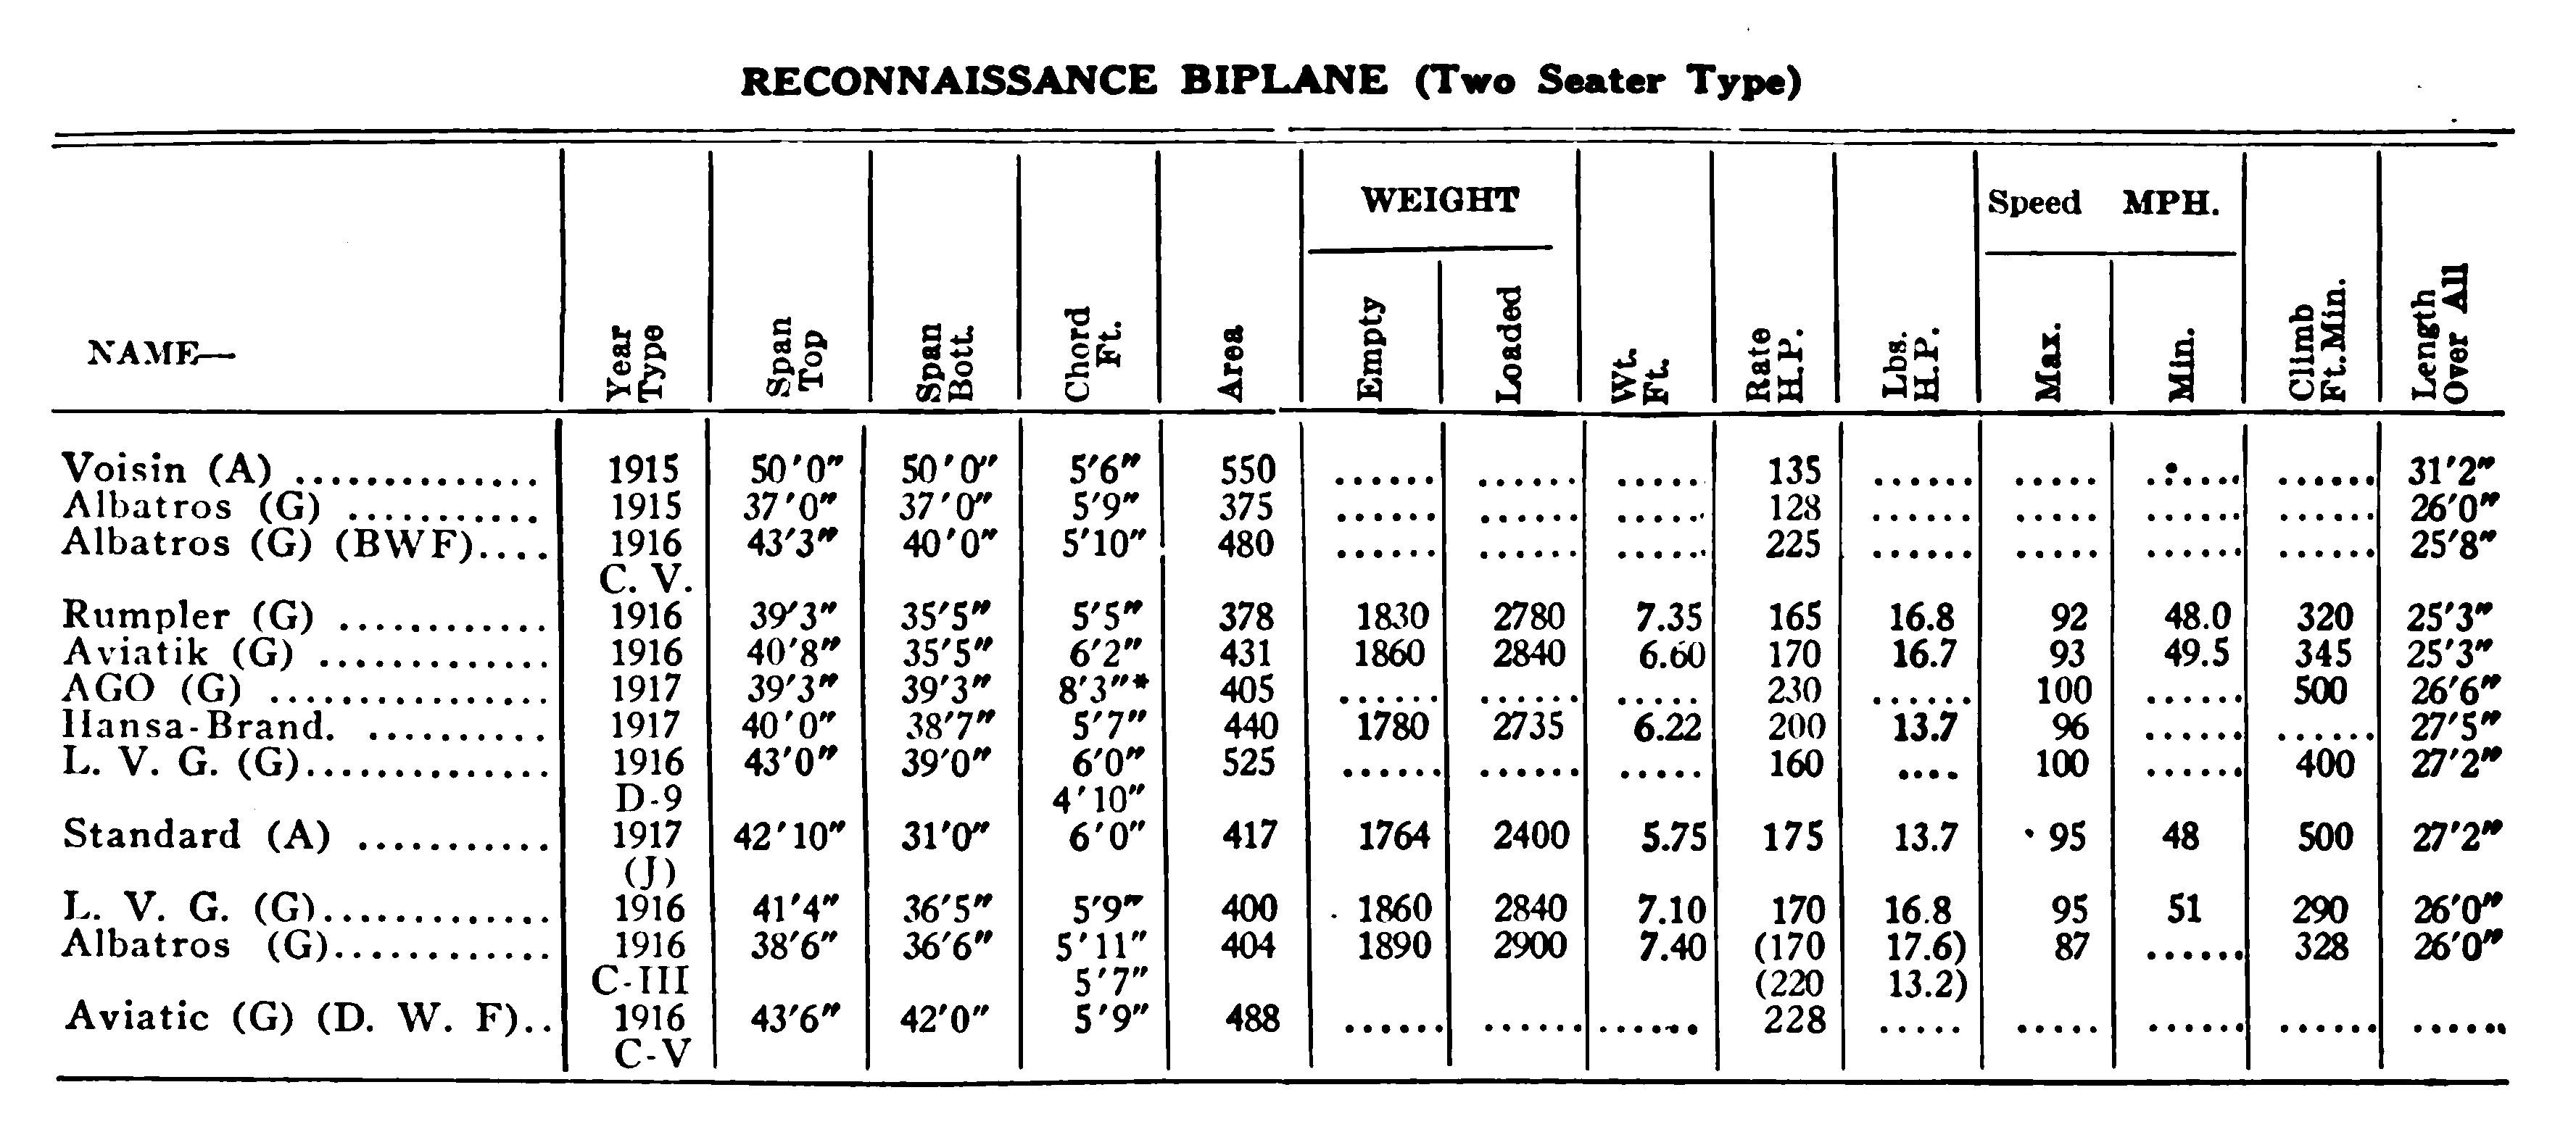 Table of Reconaissance Biplanes